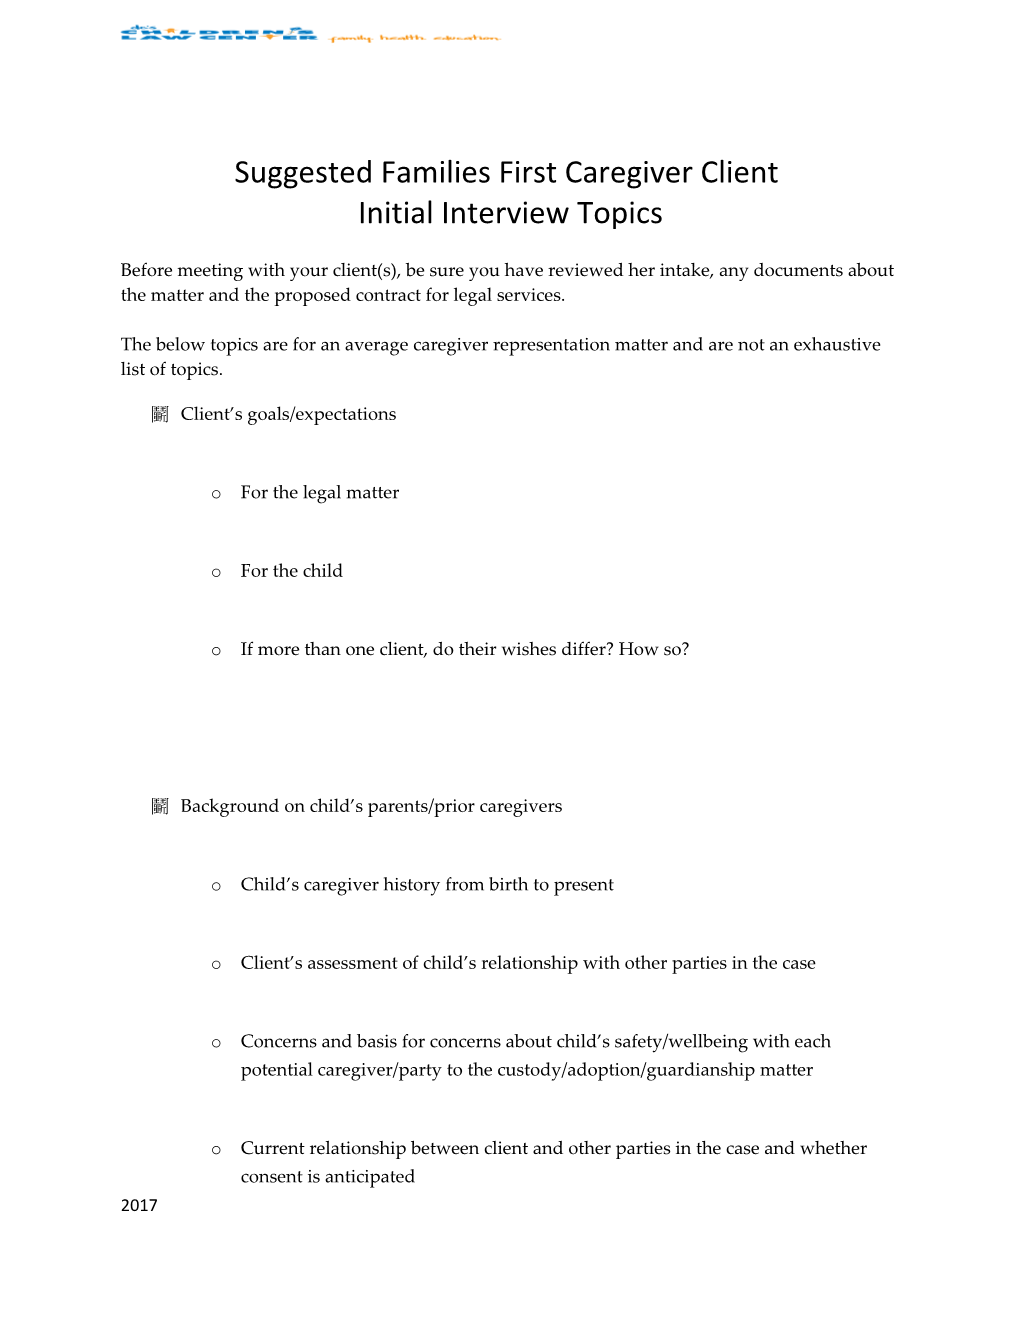 Suggested Families First Caregiver Client